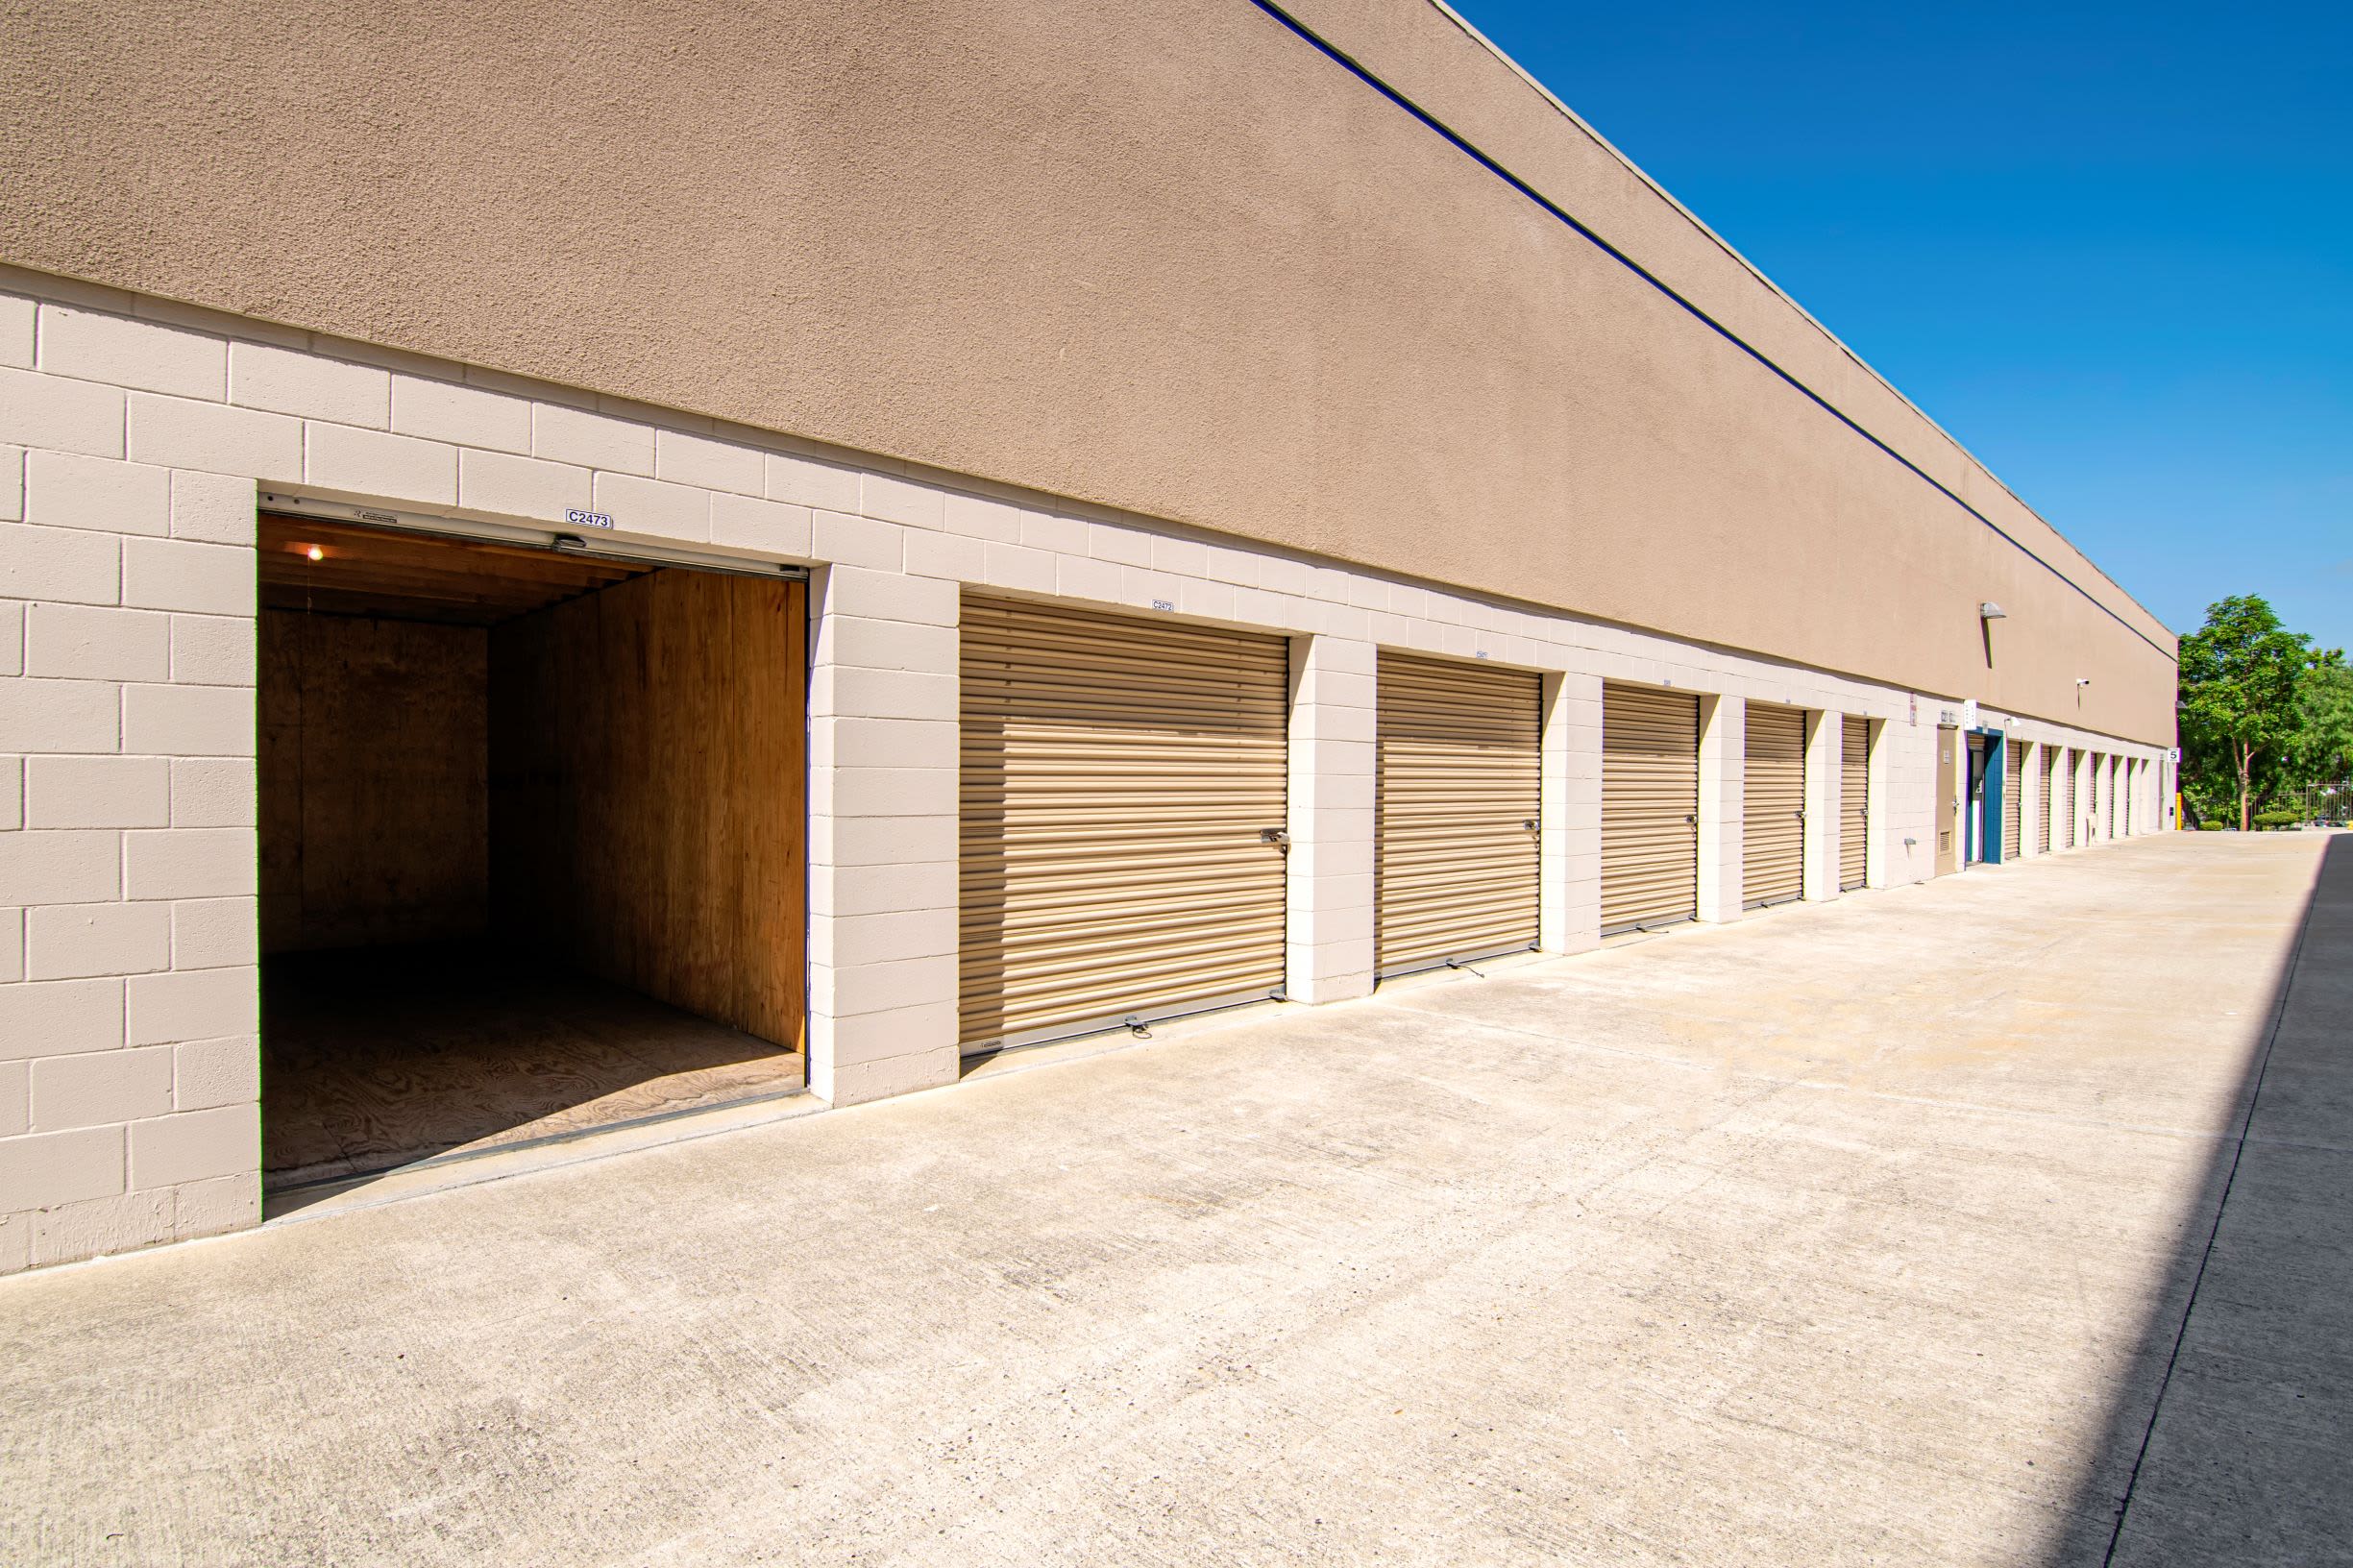 Drive-up storage units at Sorrento Valley Self Storage in San Diego, California